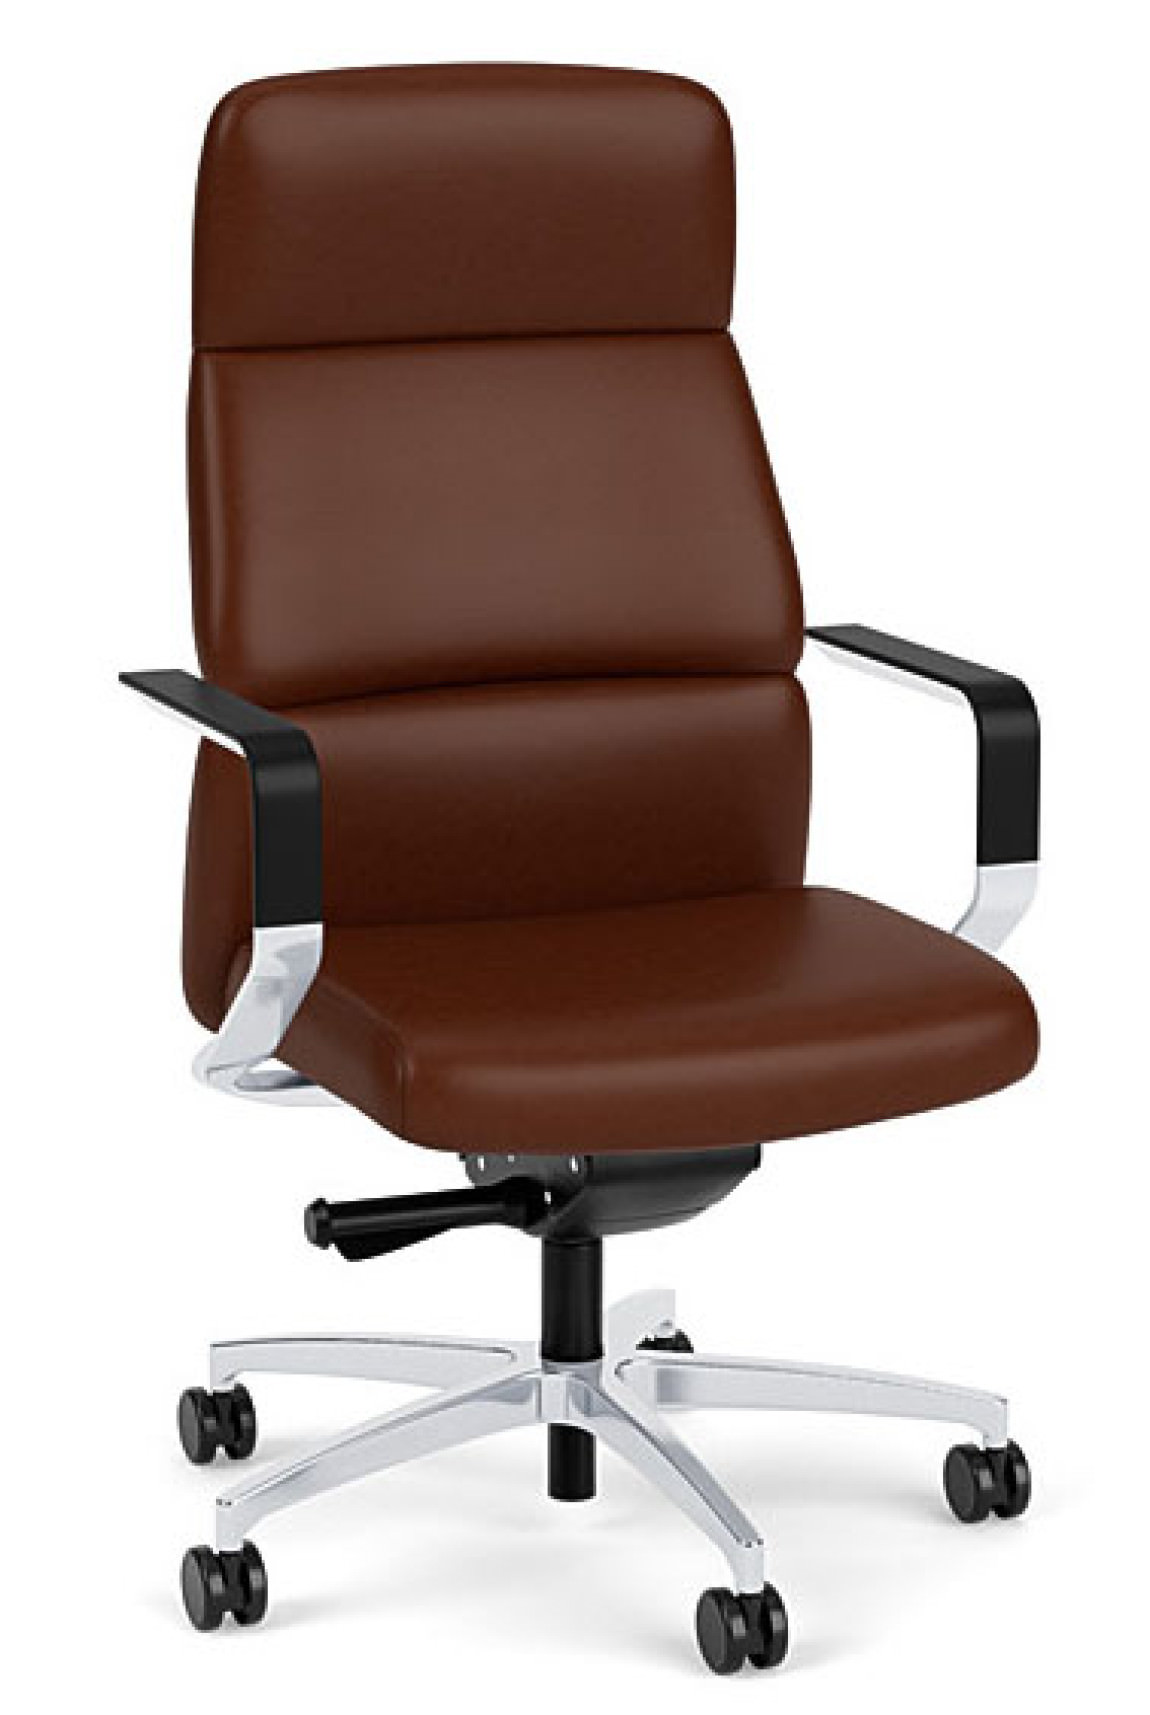 Brown Leather High Back Conference Room Office Chair 